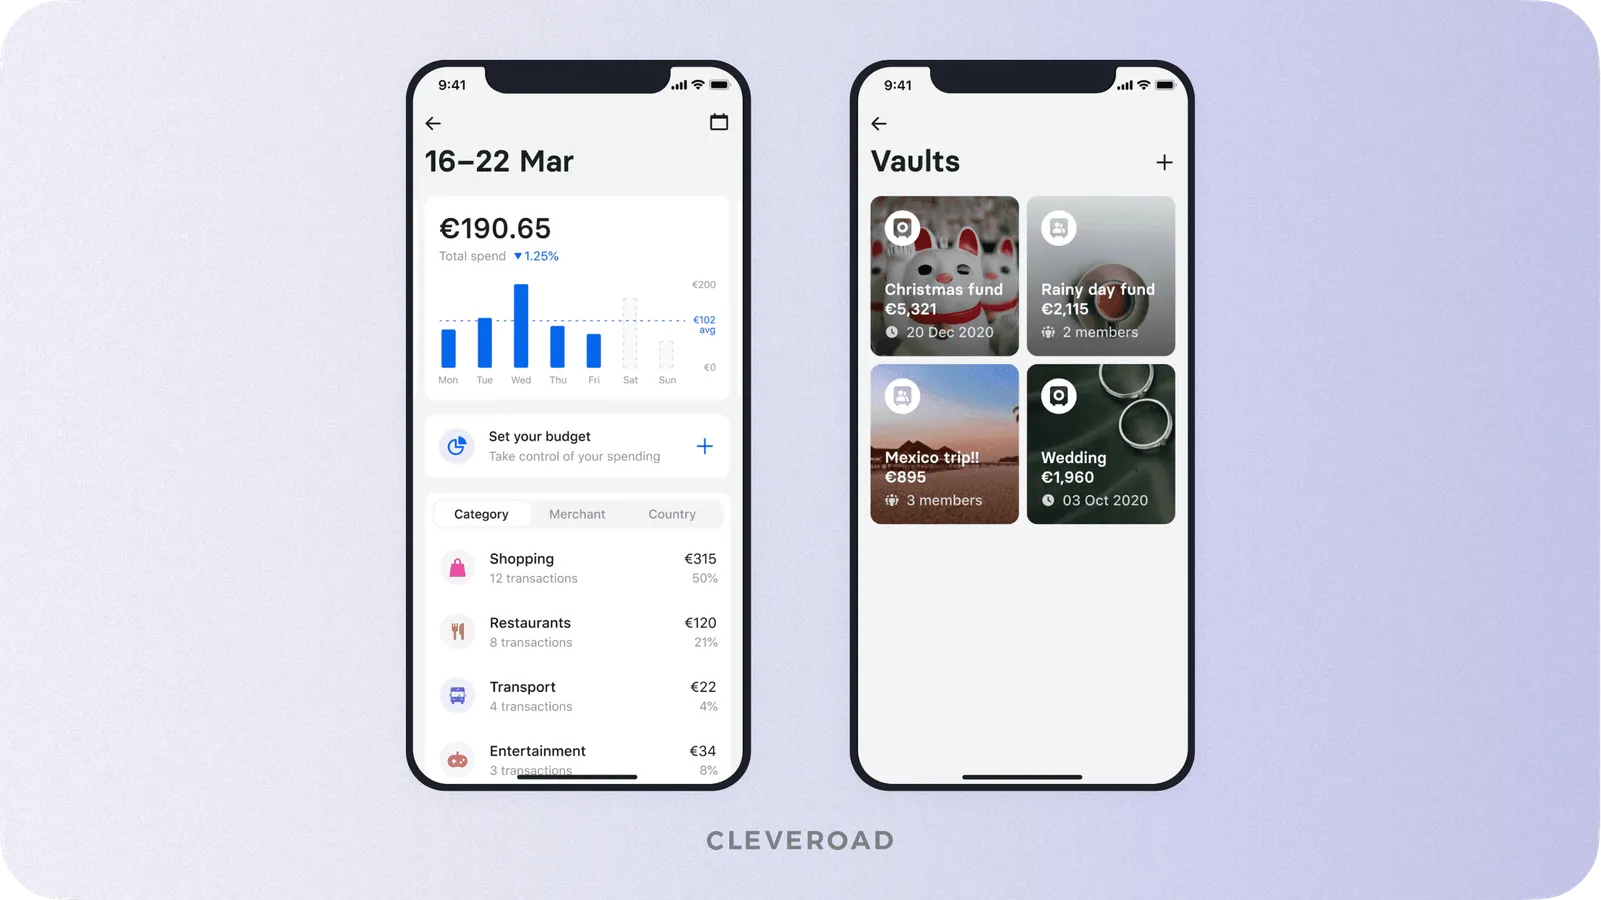 Revolut allows users to track their spendings